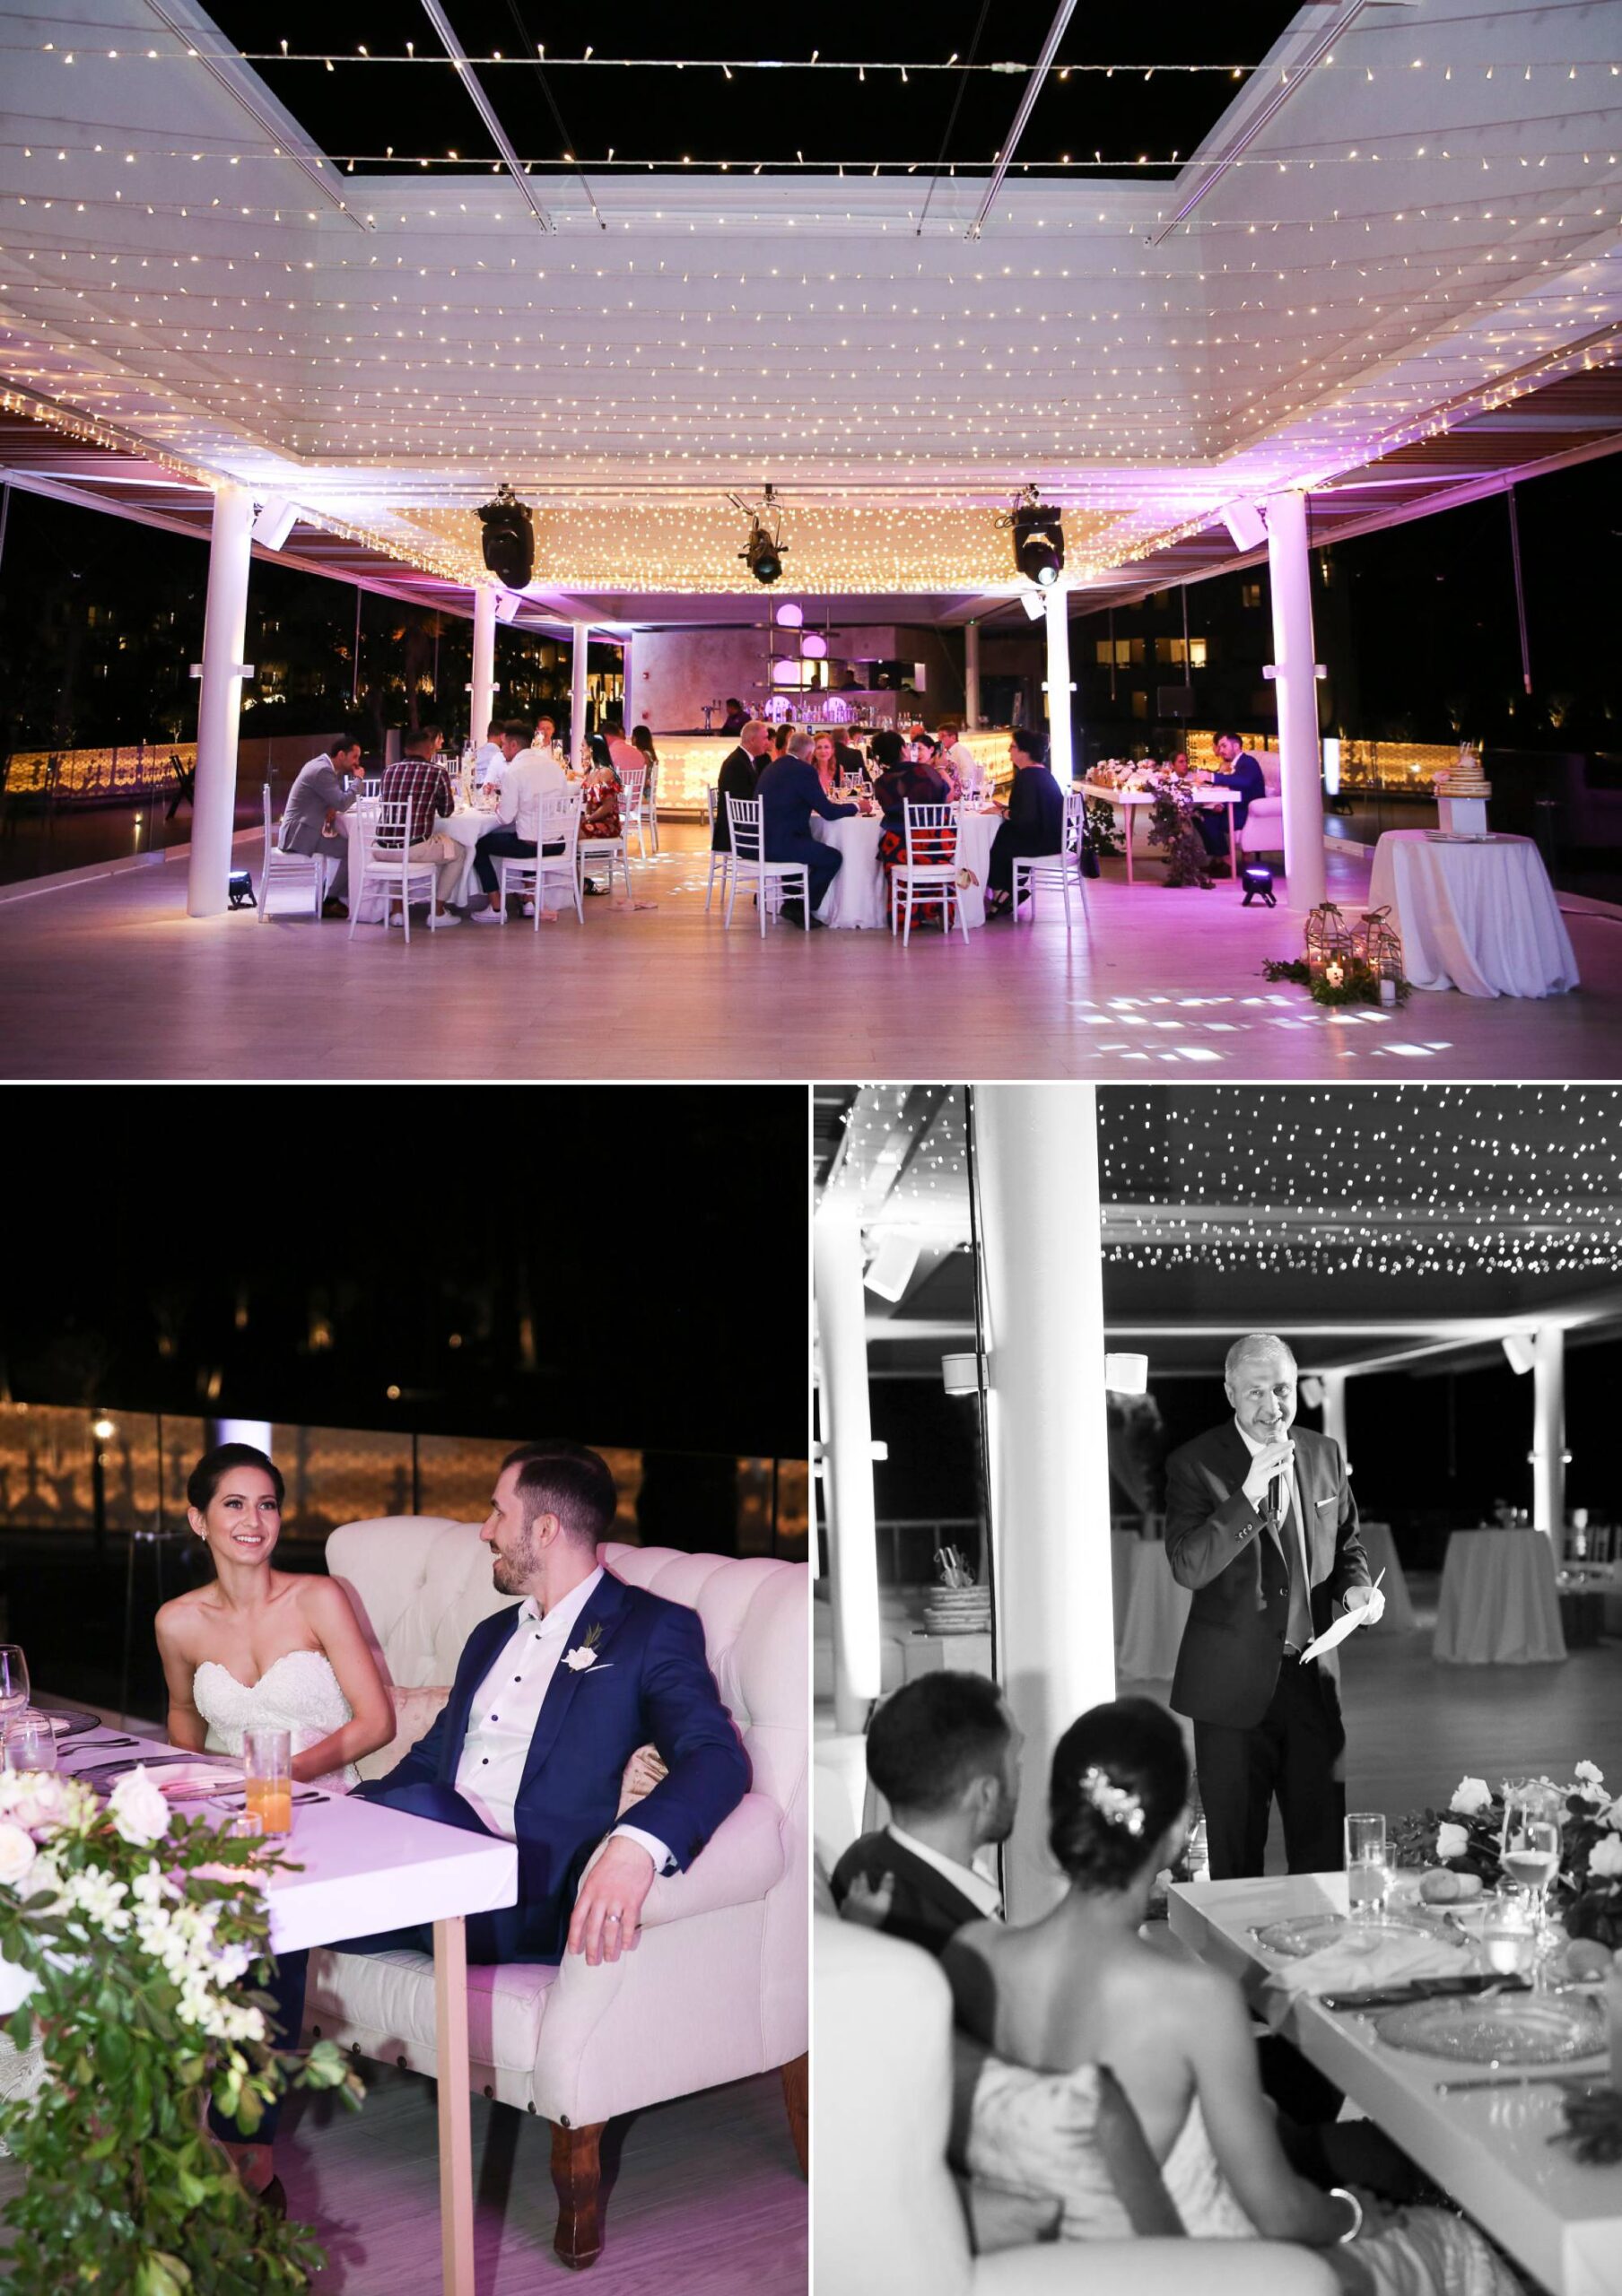 Reception candids at night time, black and white speeches